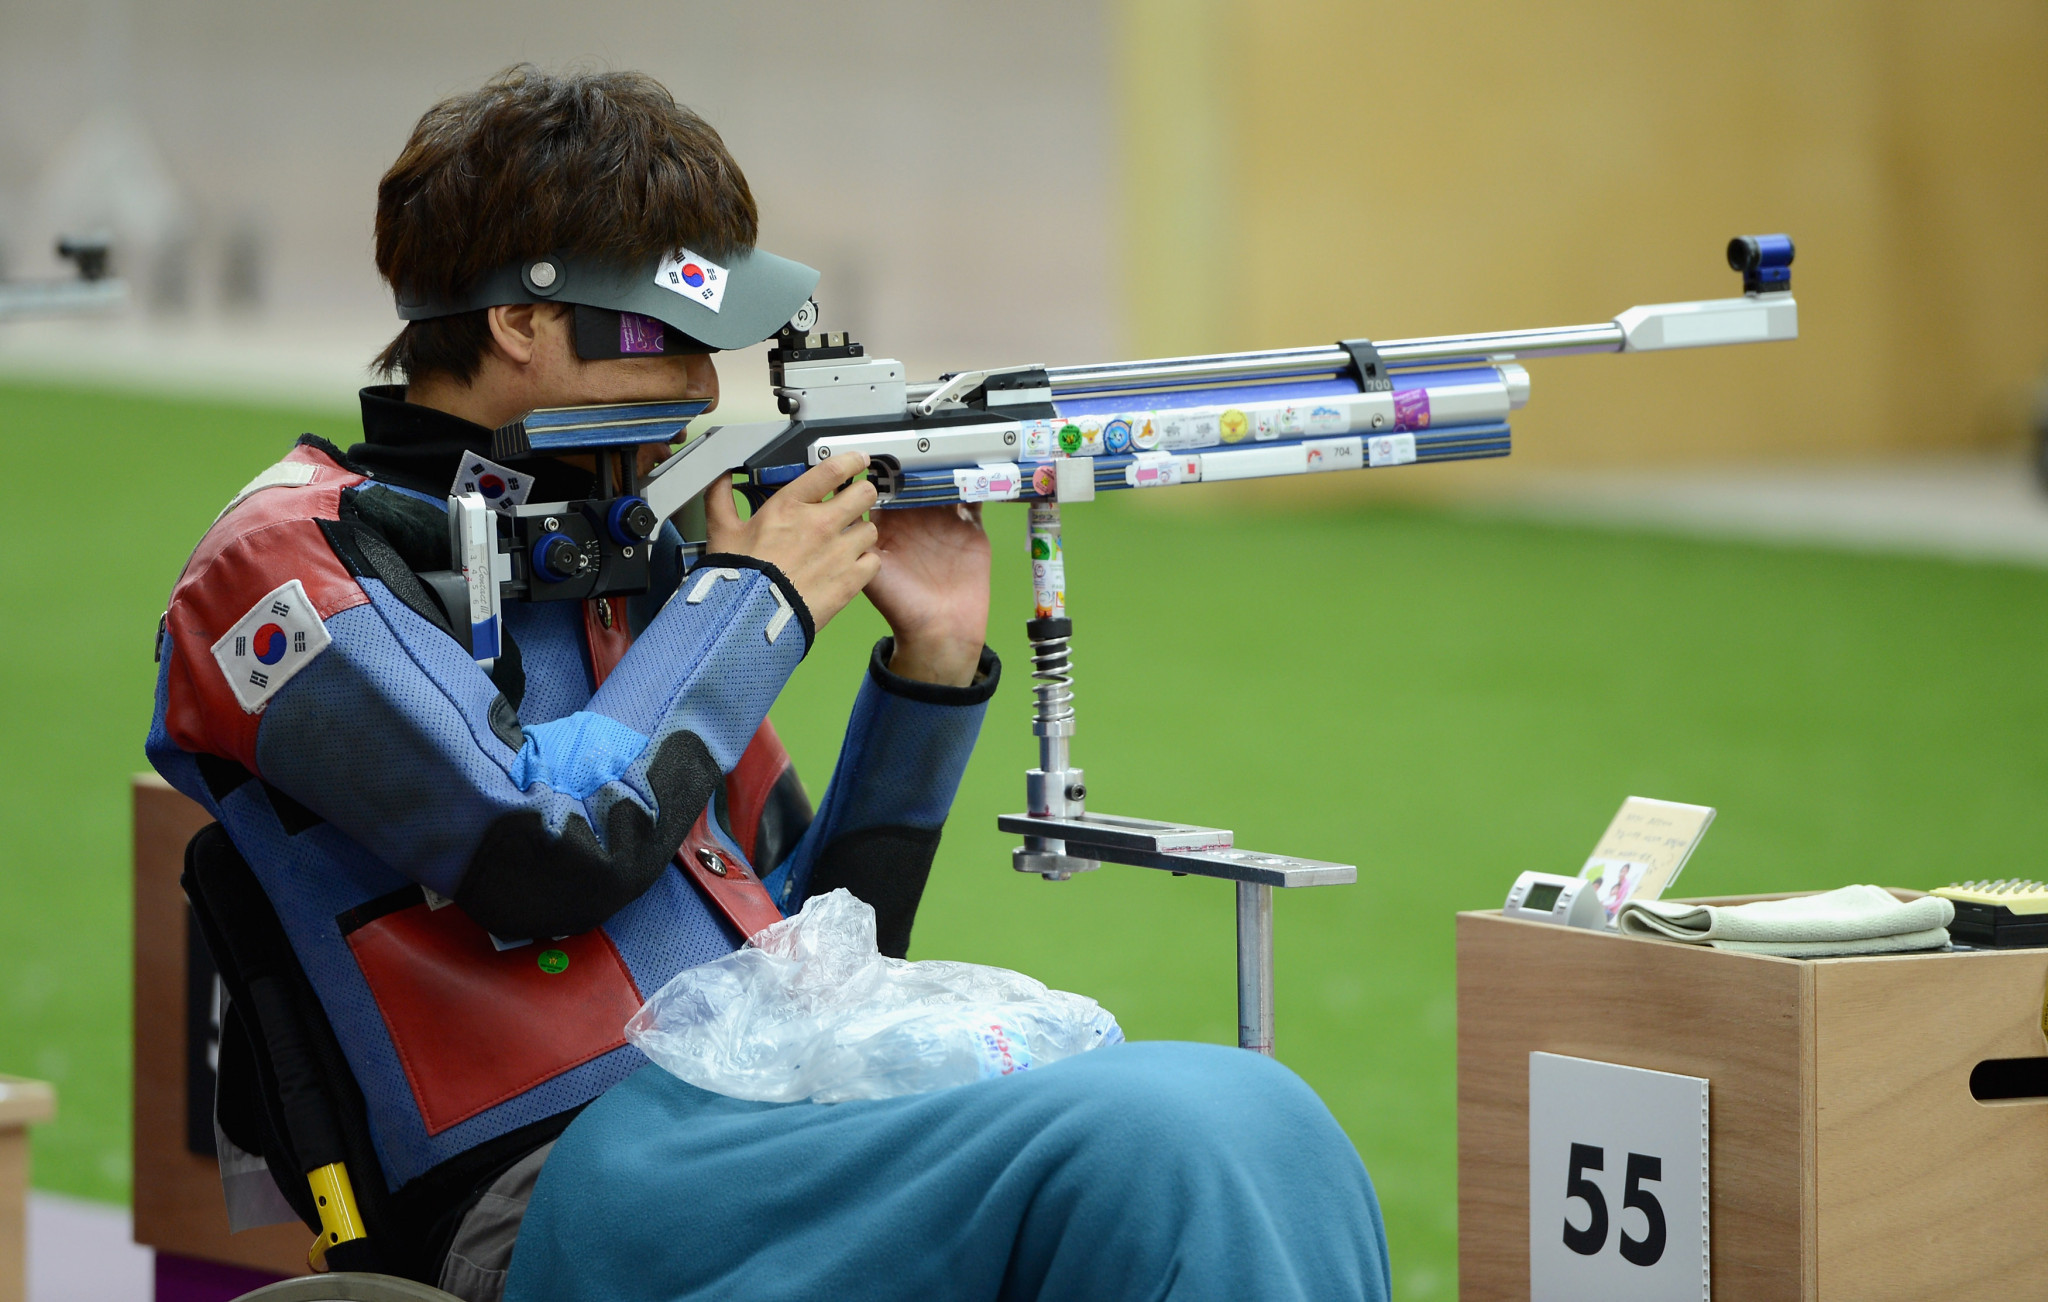 South Korea's Lee wins R4 gold at World Shooting Para Sport World Cup in Osijek